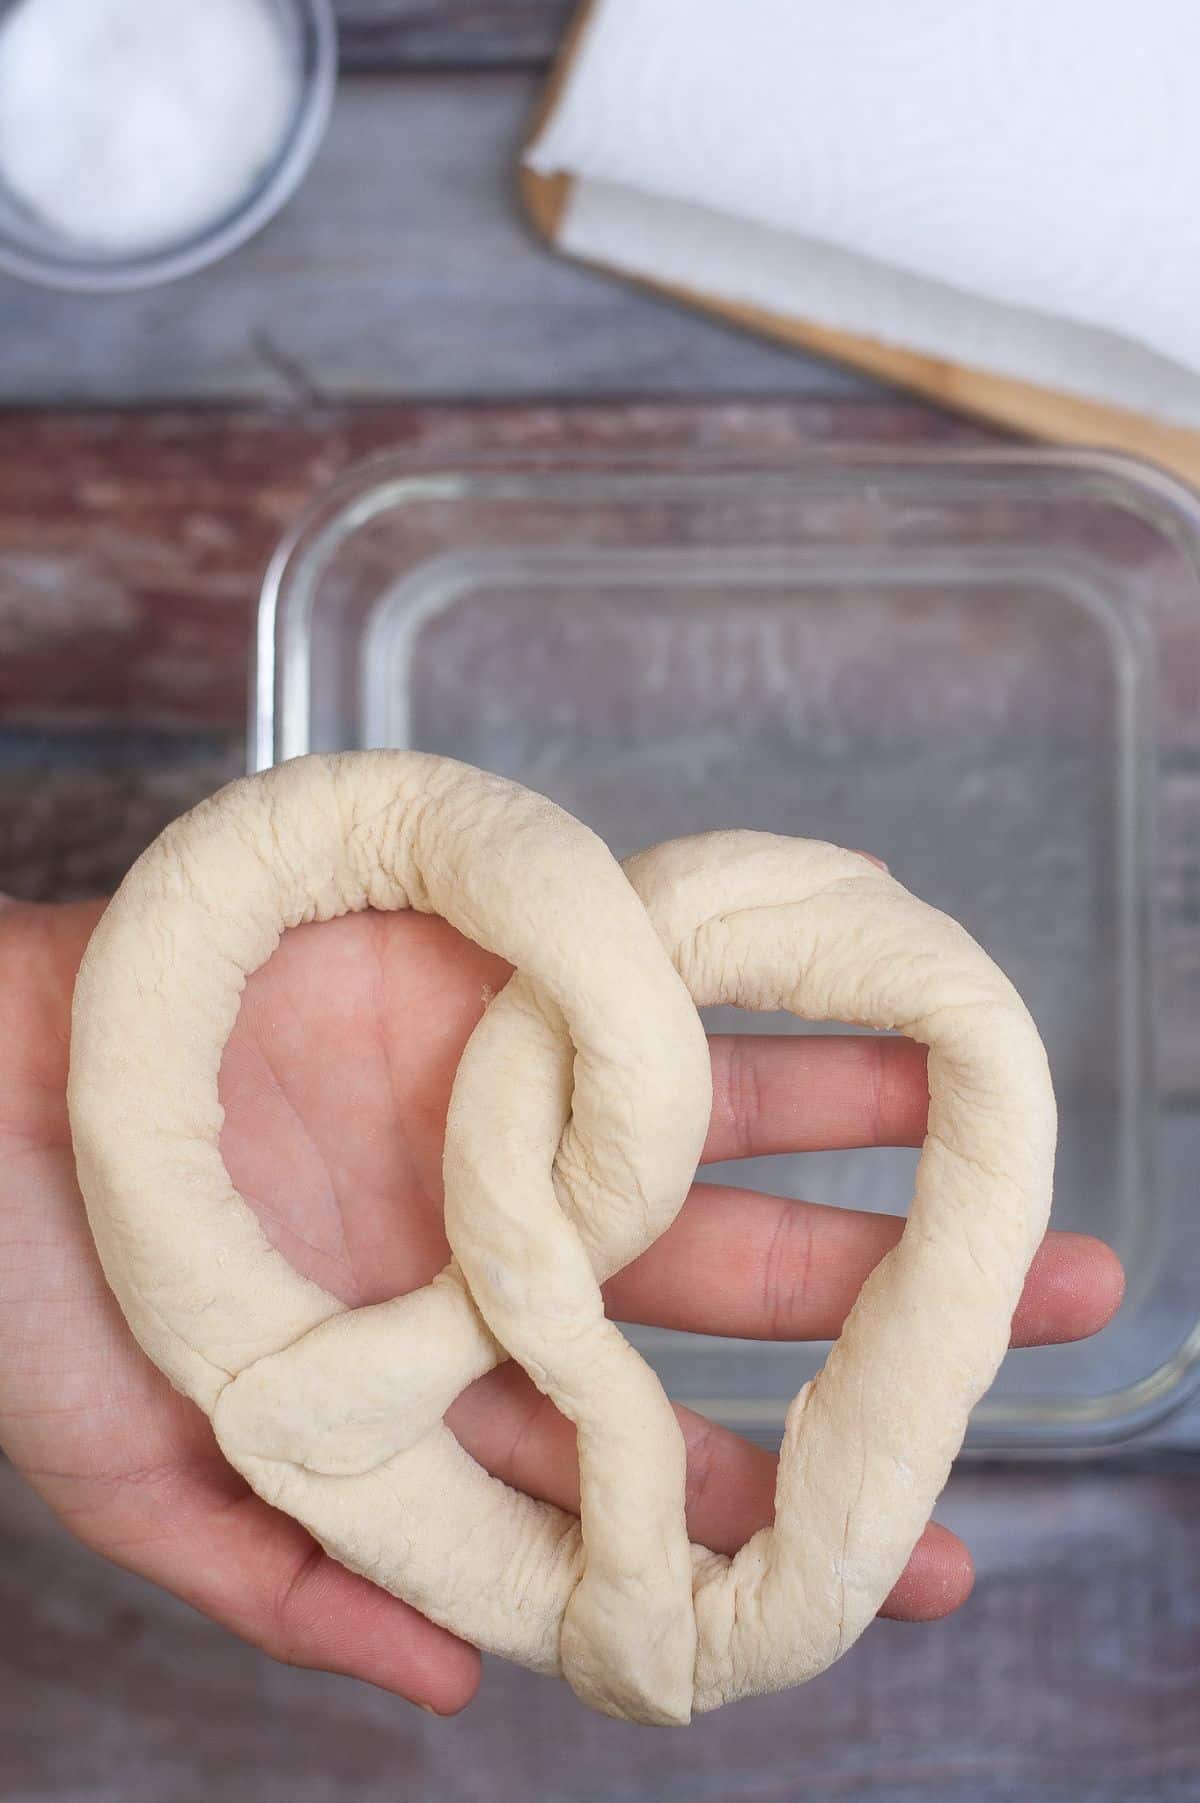 The pretzel dough is being held by a hand. 